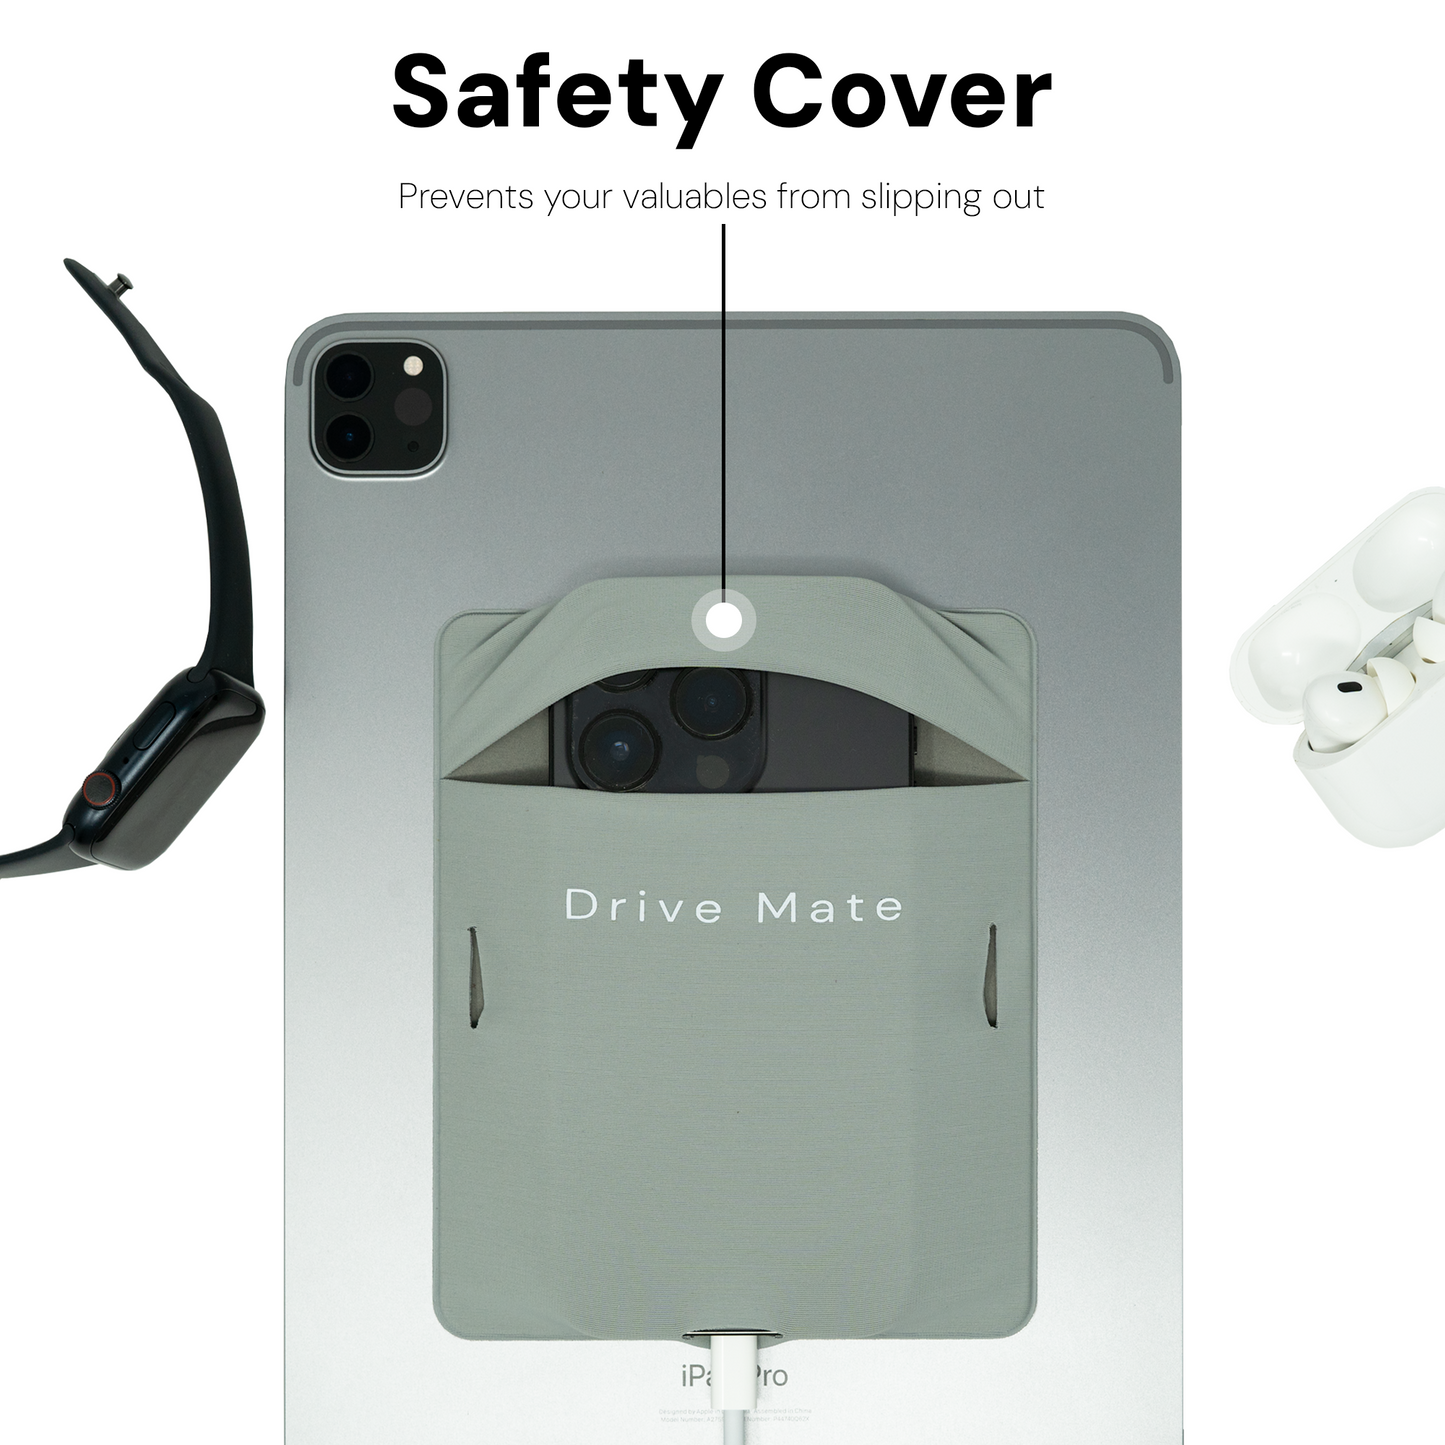 DriveMate - Portable Hard Drive Sleeve for Laptop